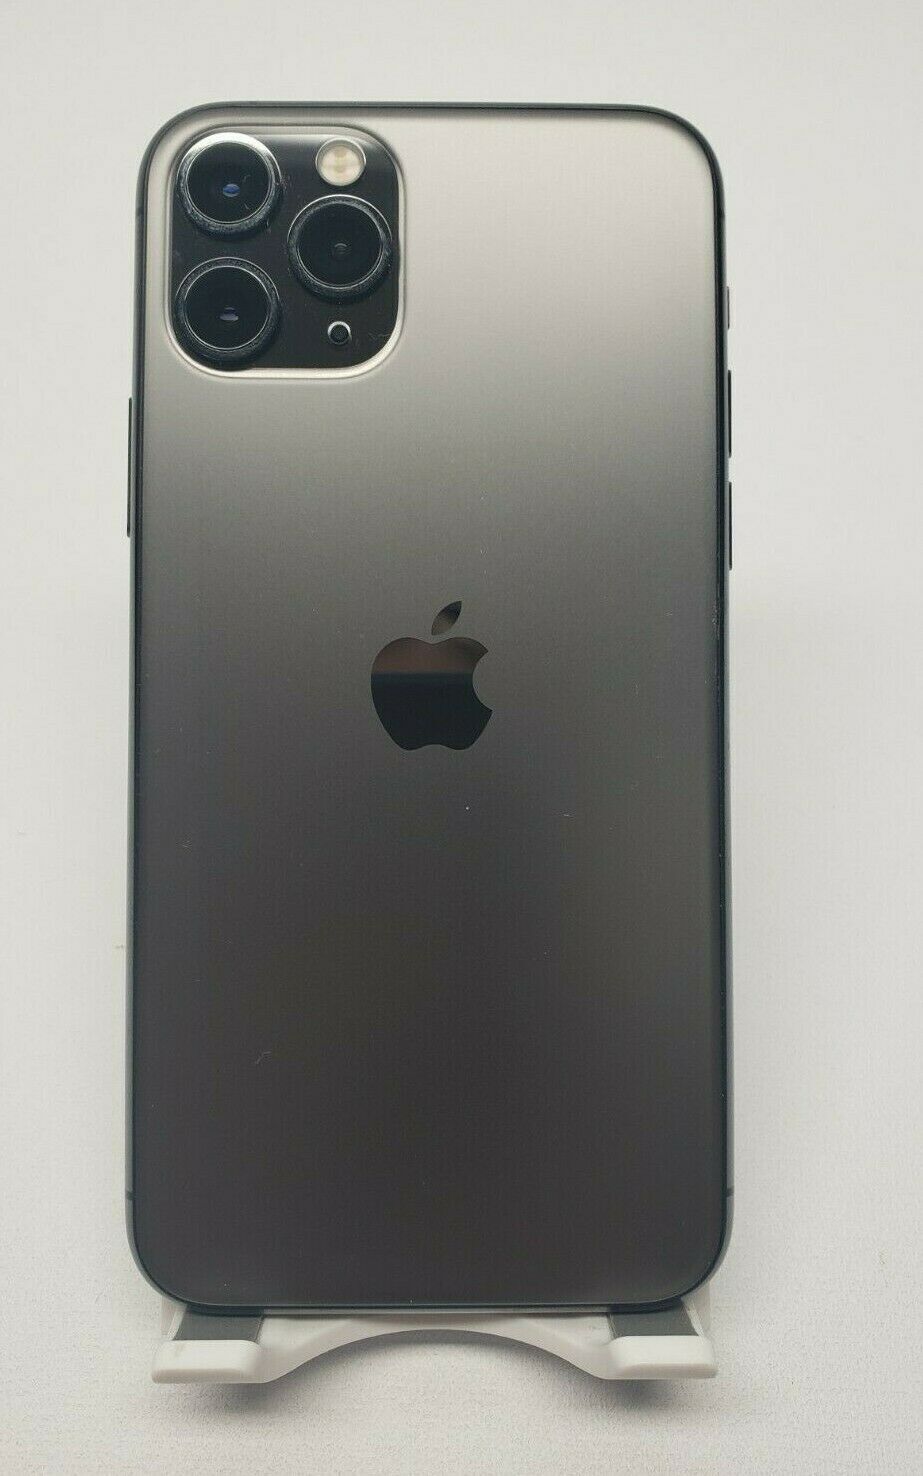 Apple iPhone 11 Pro Max 64GB Space Gray A2161 Verizon ONLY 